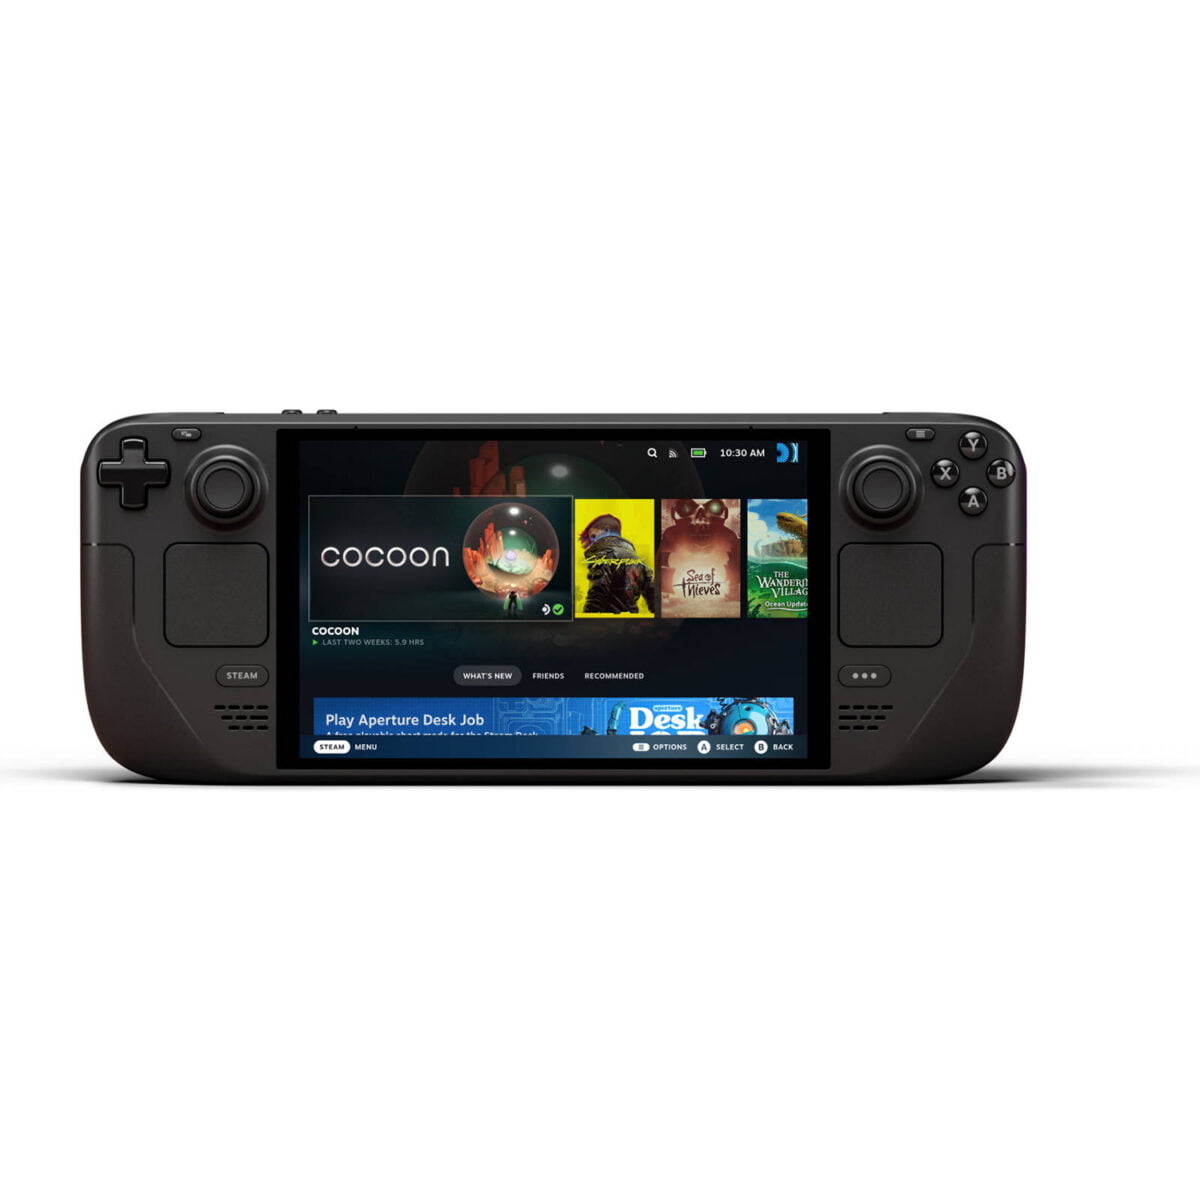 VALVE Steam Deck OLED Handheld Gaming Console - 1TB